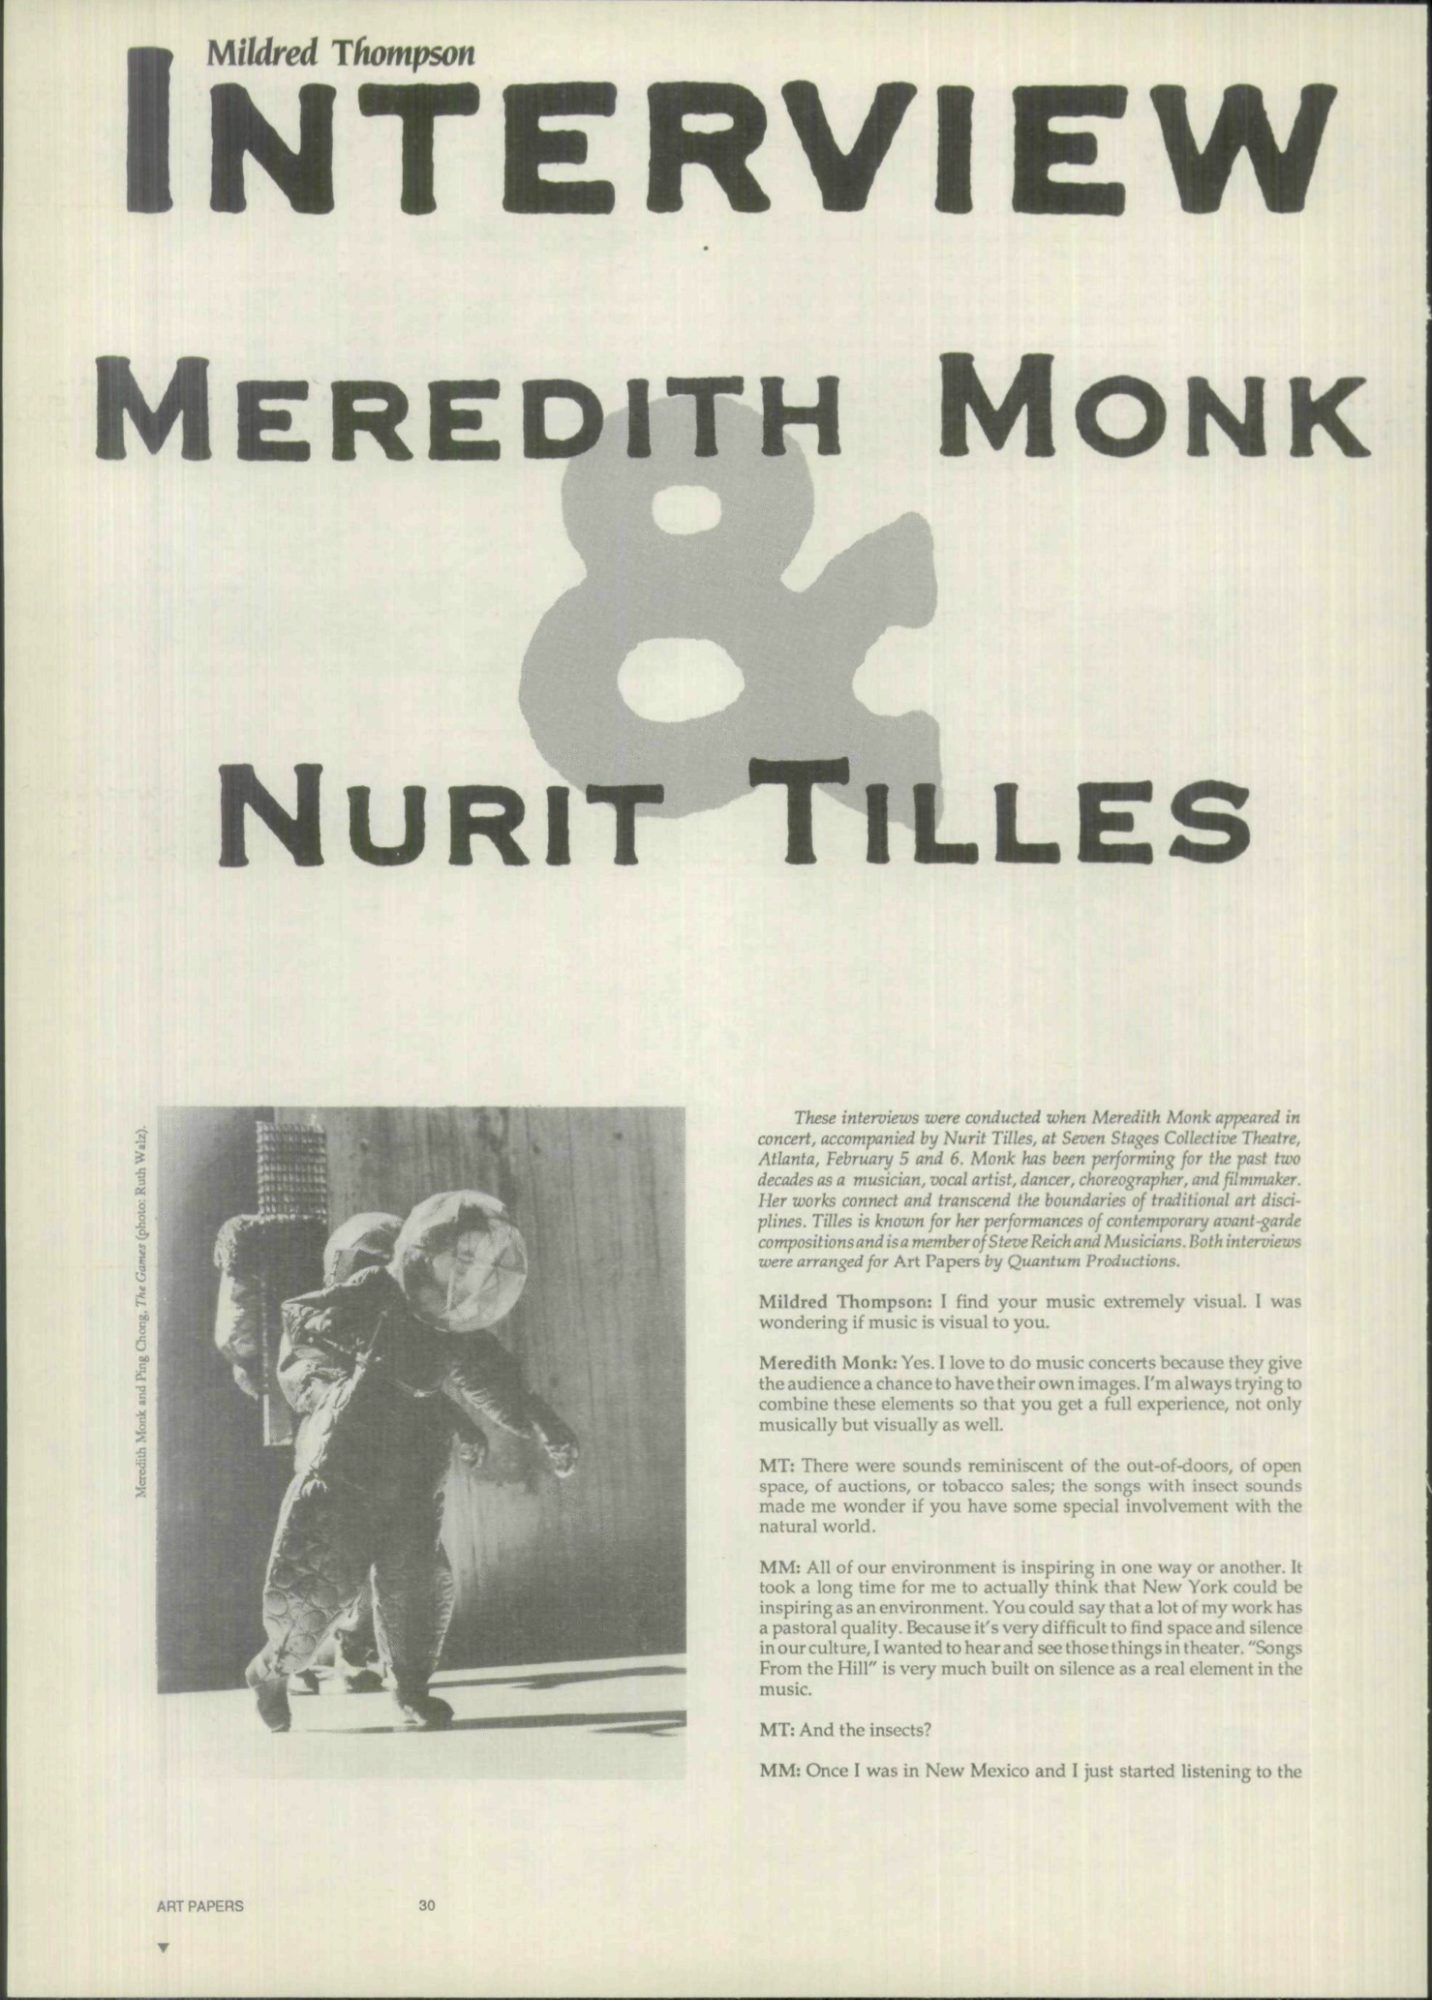 Transcript of an interview between Mildred Thompson and Meredith Monk